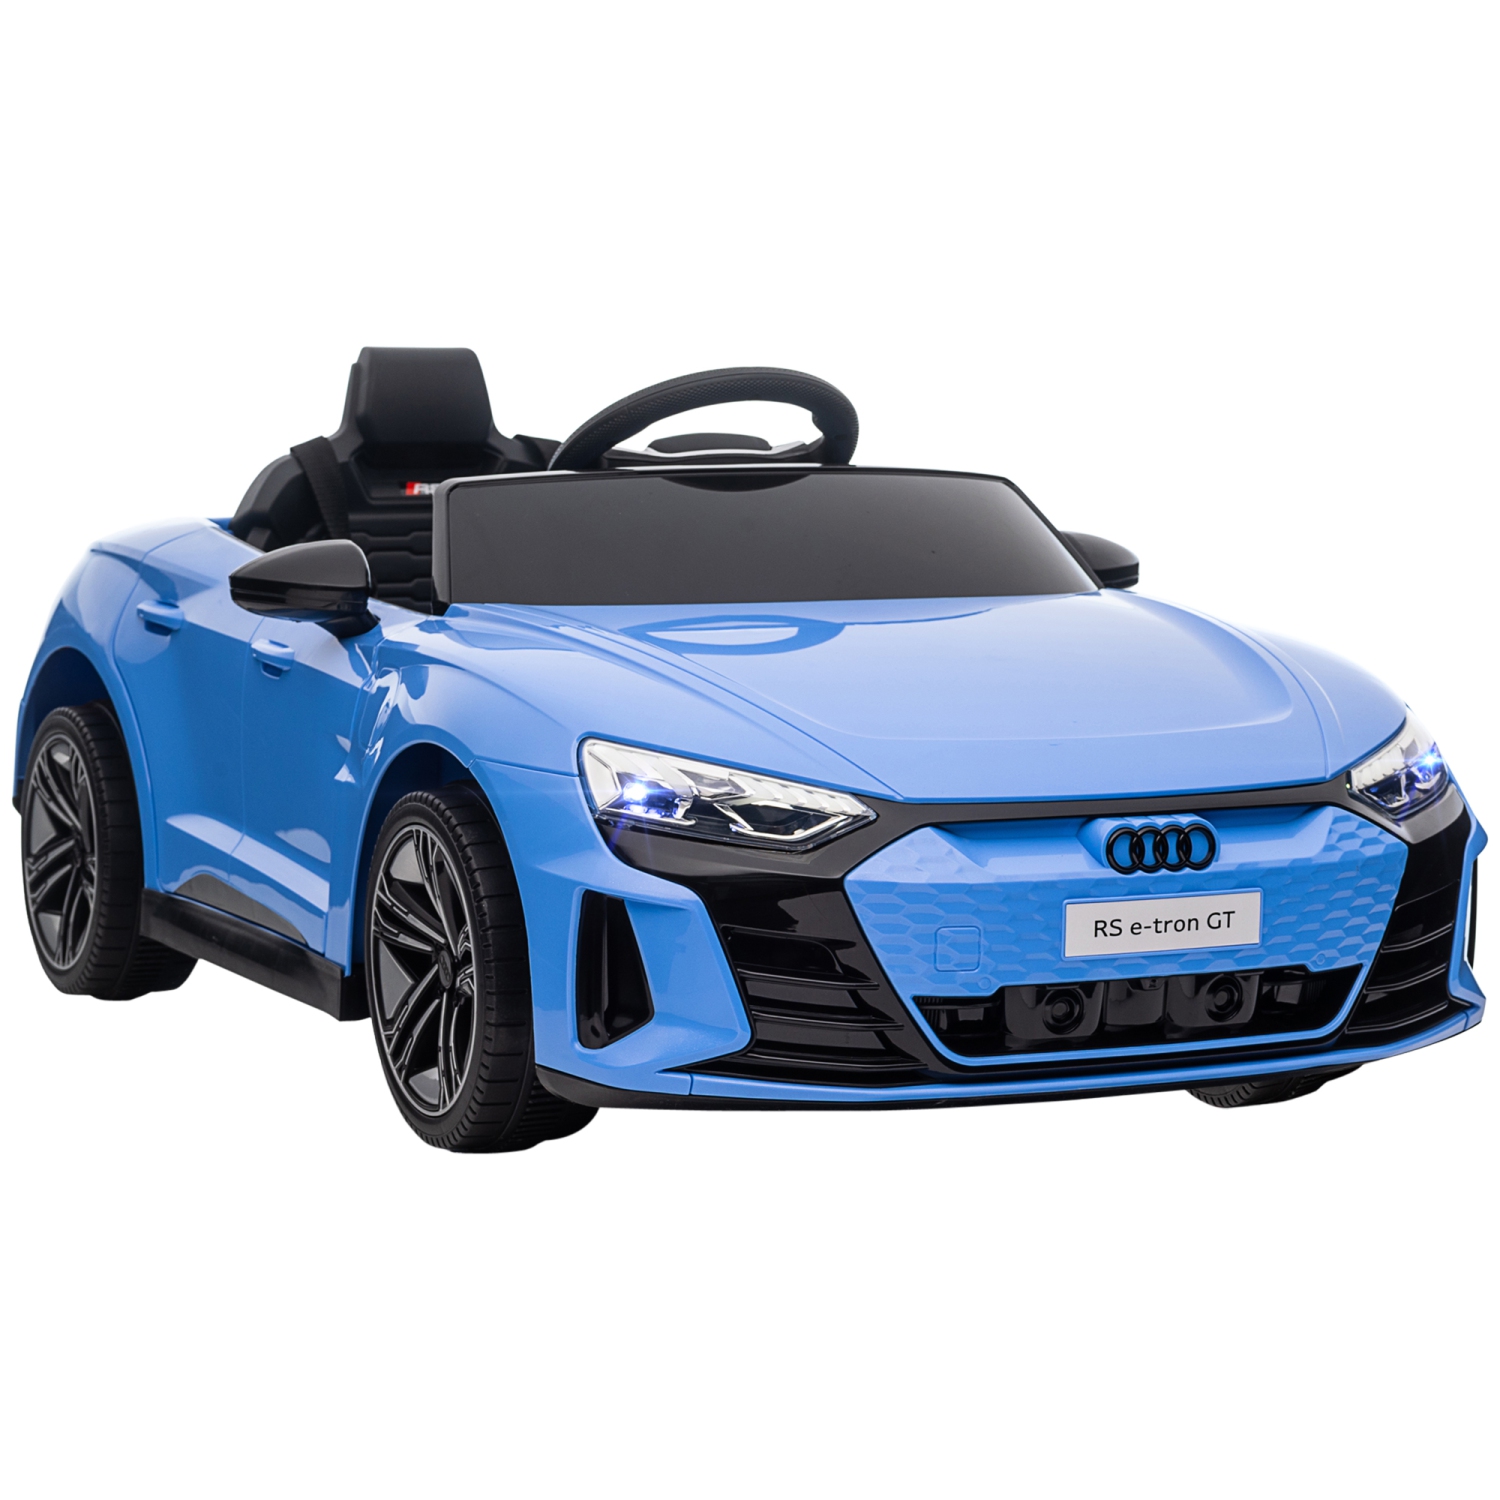 Aosom Electric Ride On Car with Remote Control, 12V 3.1 MPH Kids Ride-On Toy for Boys and Girls with Suspension System, Horn Honking, Music, Lights, Blue